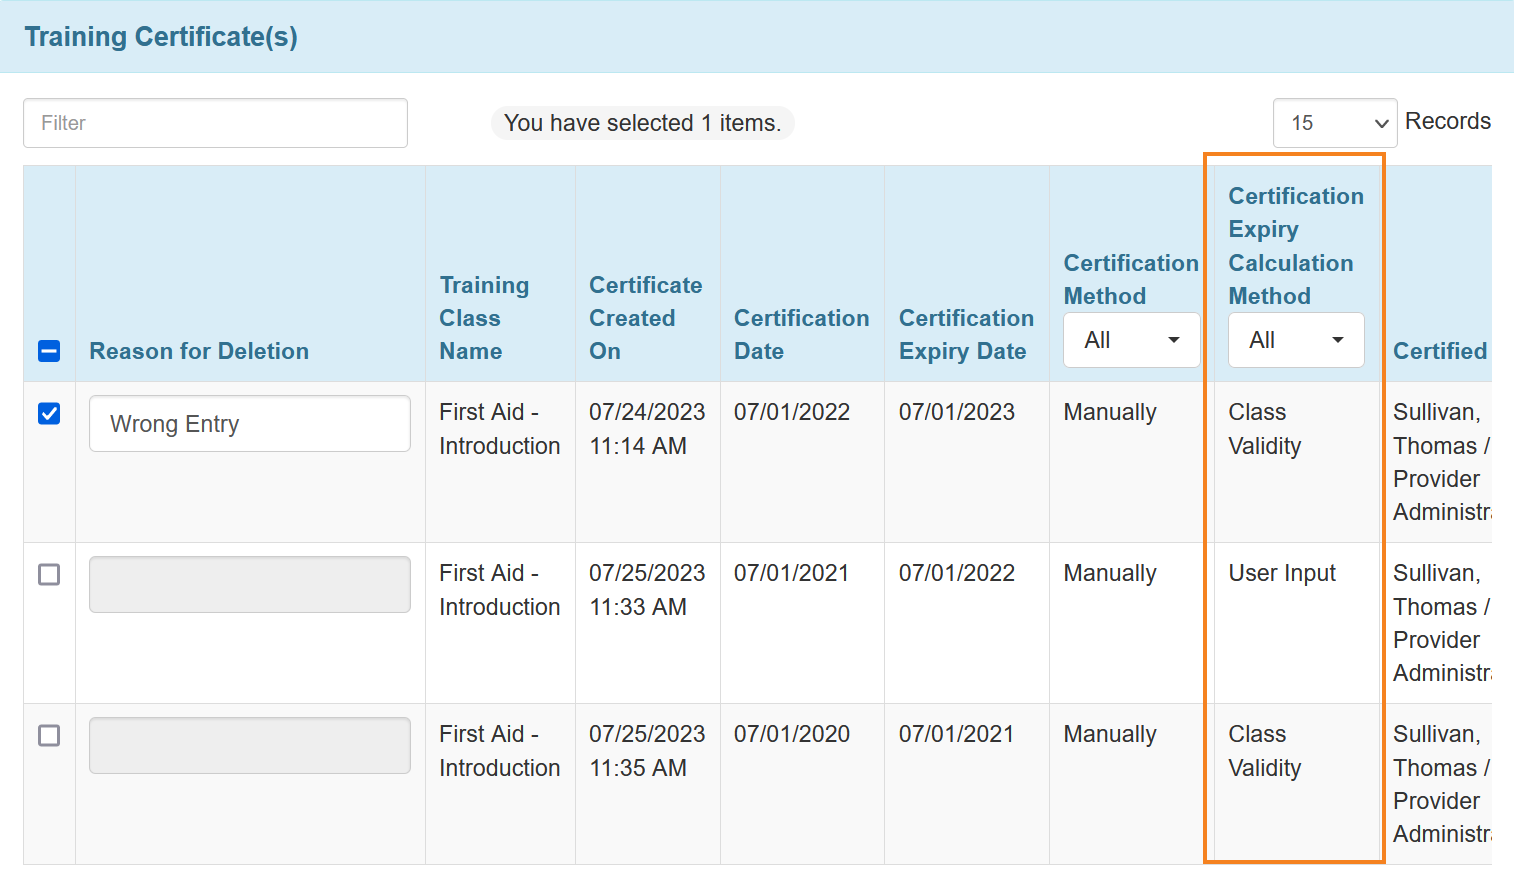 Screenshot of Training Certificate(s) section of the Delete Certification Record(s) form.